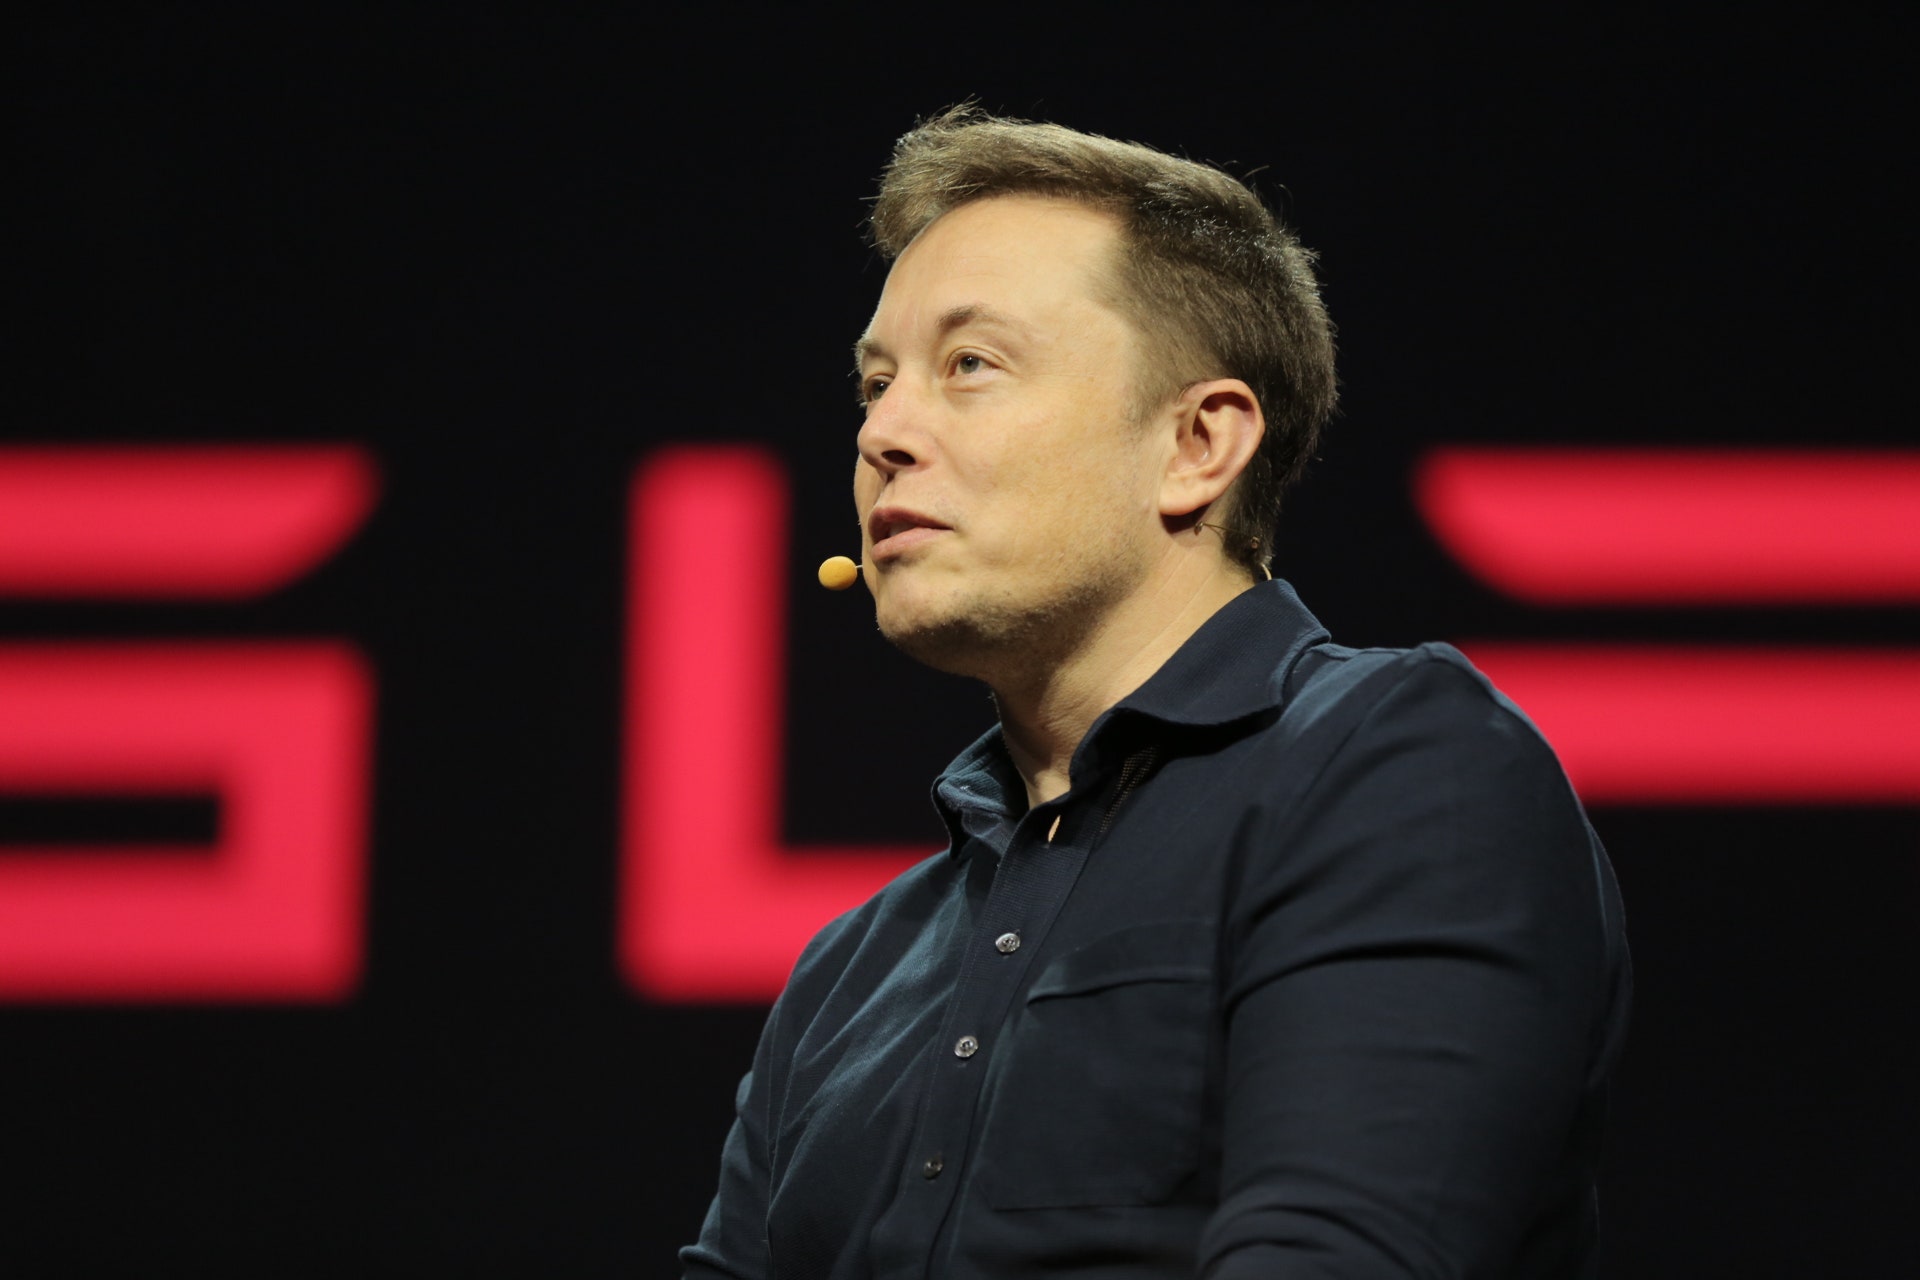 Elon Musk On Valuations Of Tesla Rivals Lucid And Rivian Says 'These Are Strange Days'